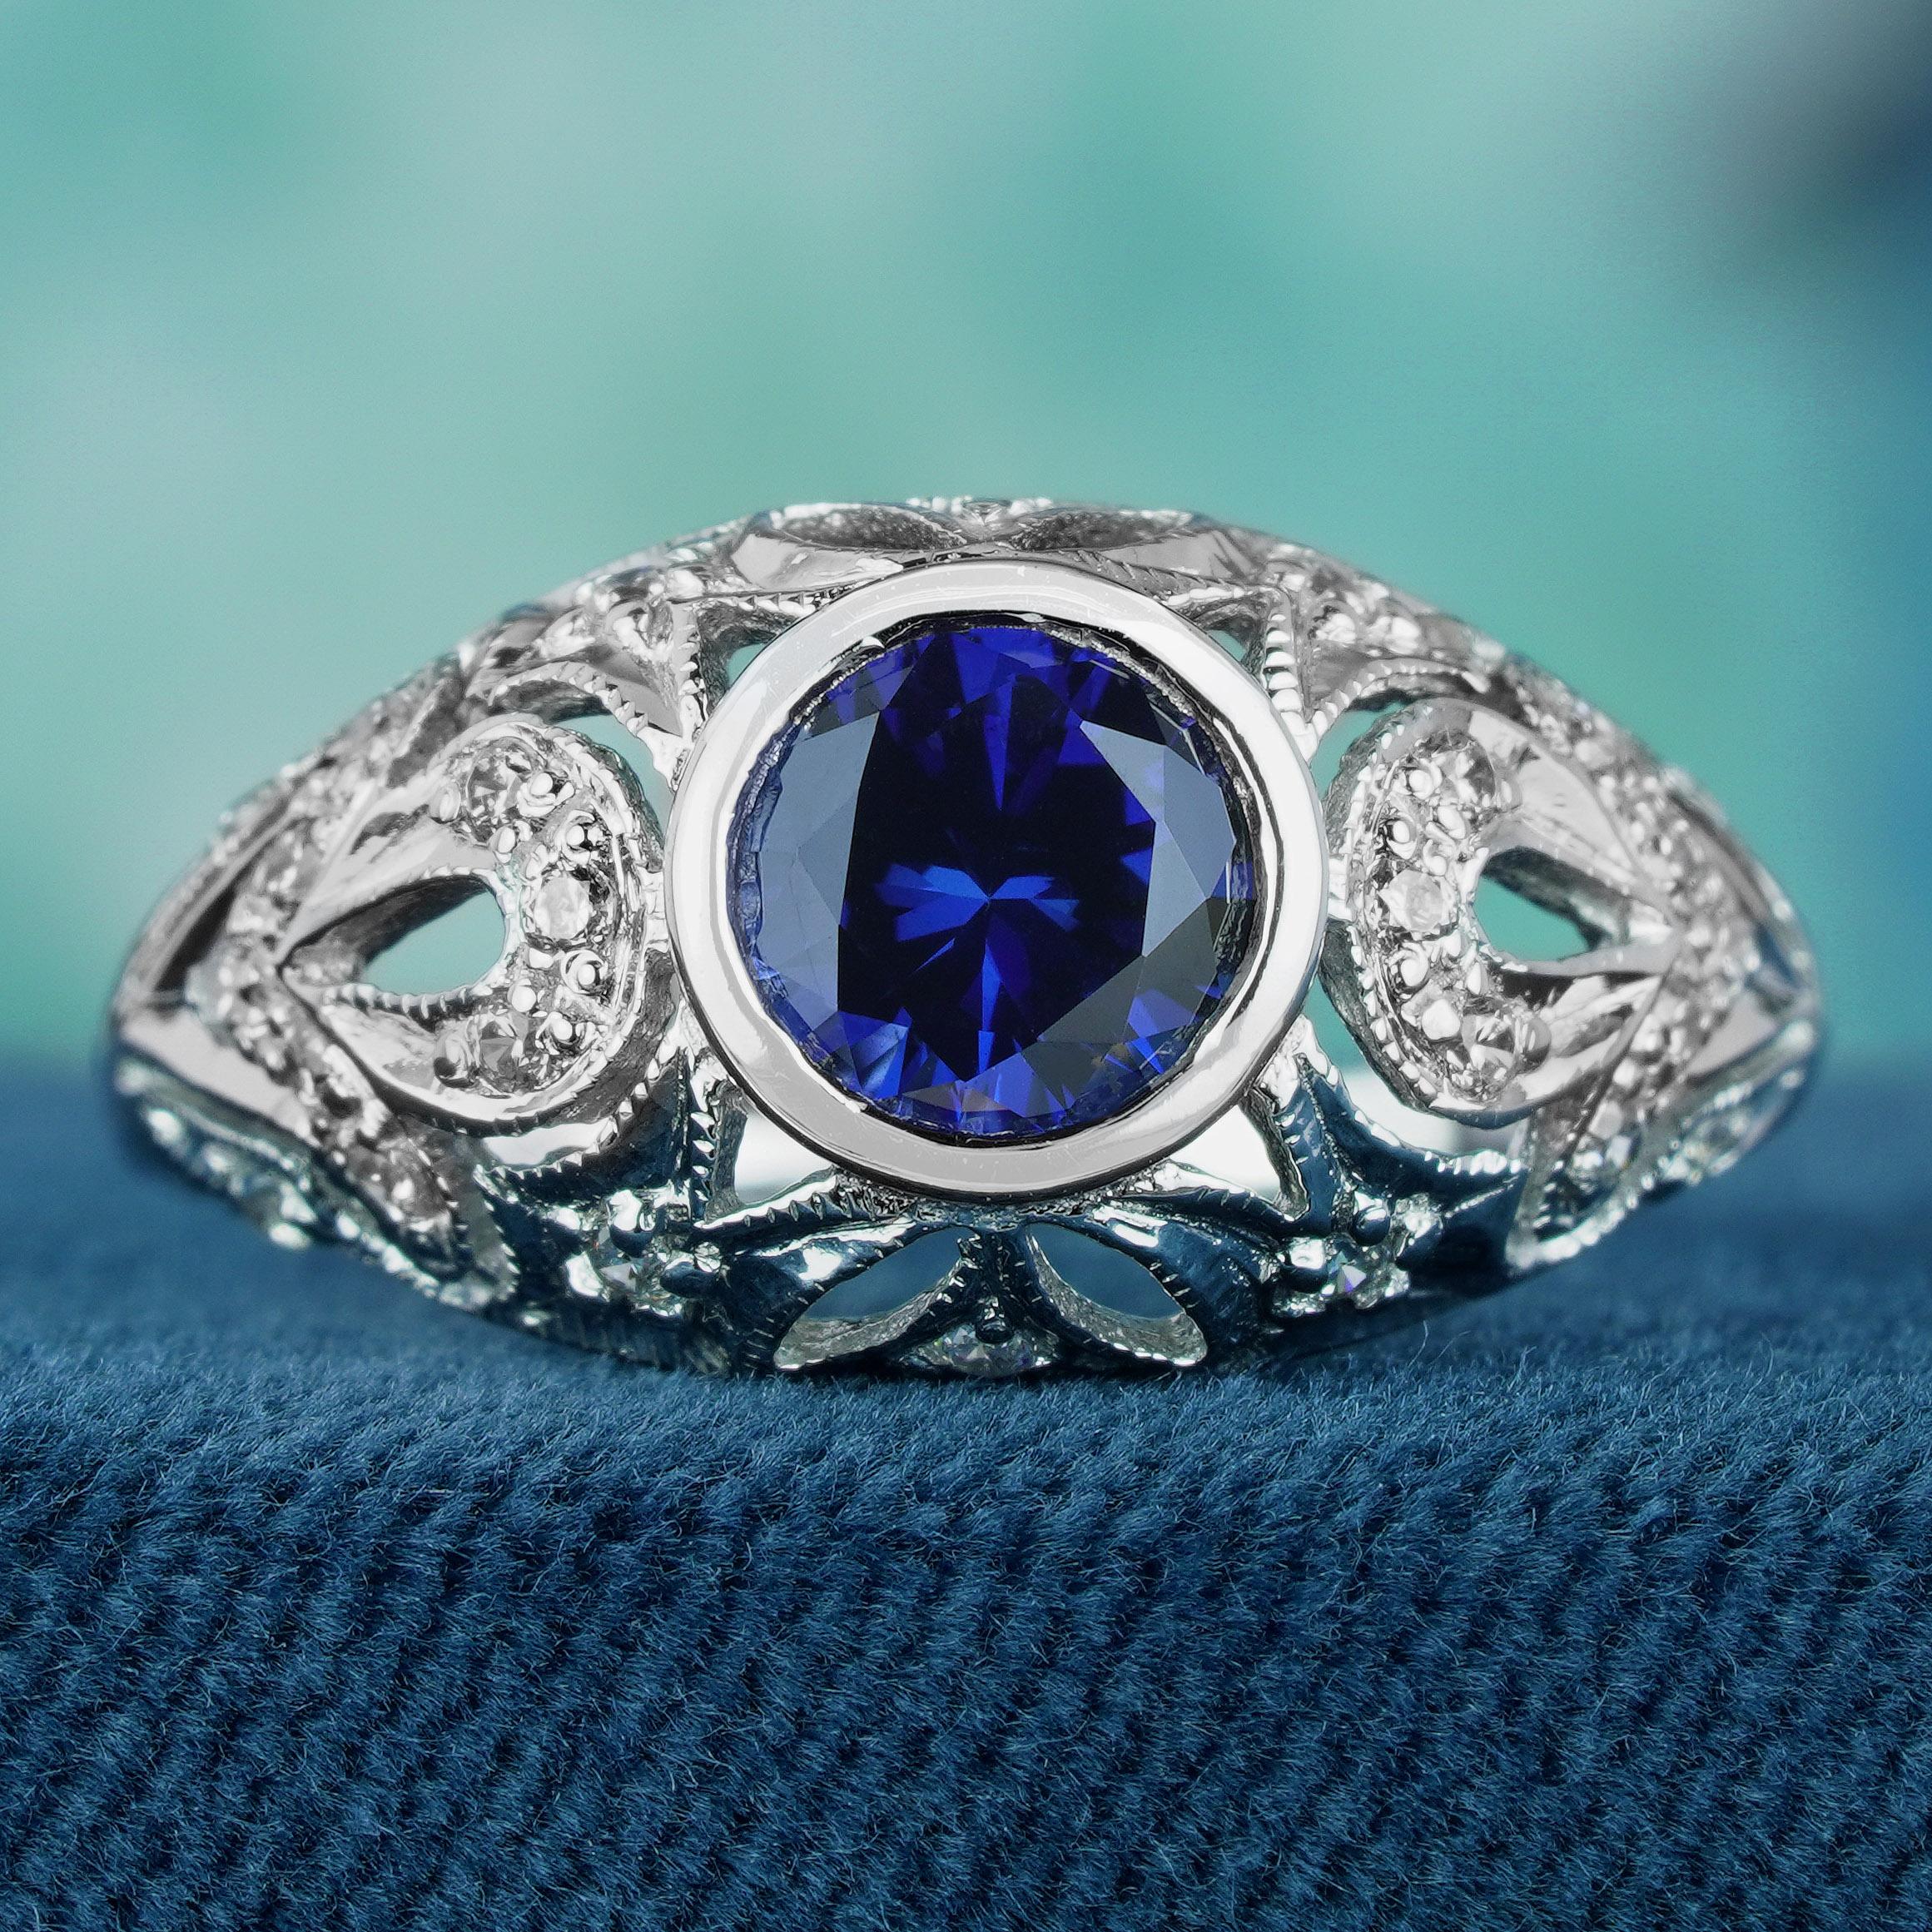 Add a delicate and unique aesthetic to your hand with this filigree ring crafted in elegant white gold, this exquisite ring showcases a breathtaking natural blue sapphire as its centerpiece. Intricate filigree detailing surrounding the sapphire